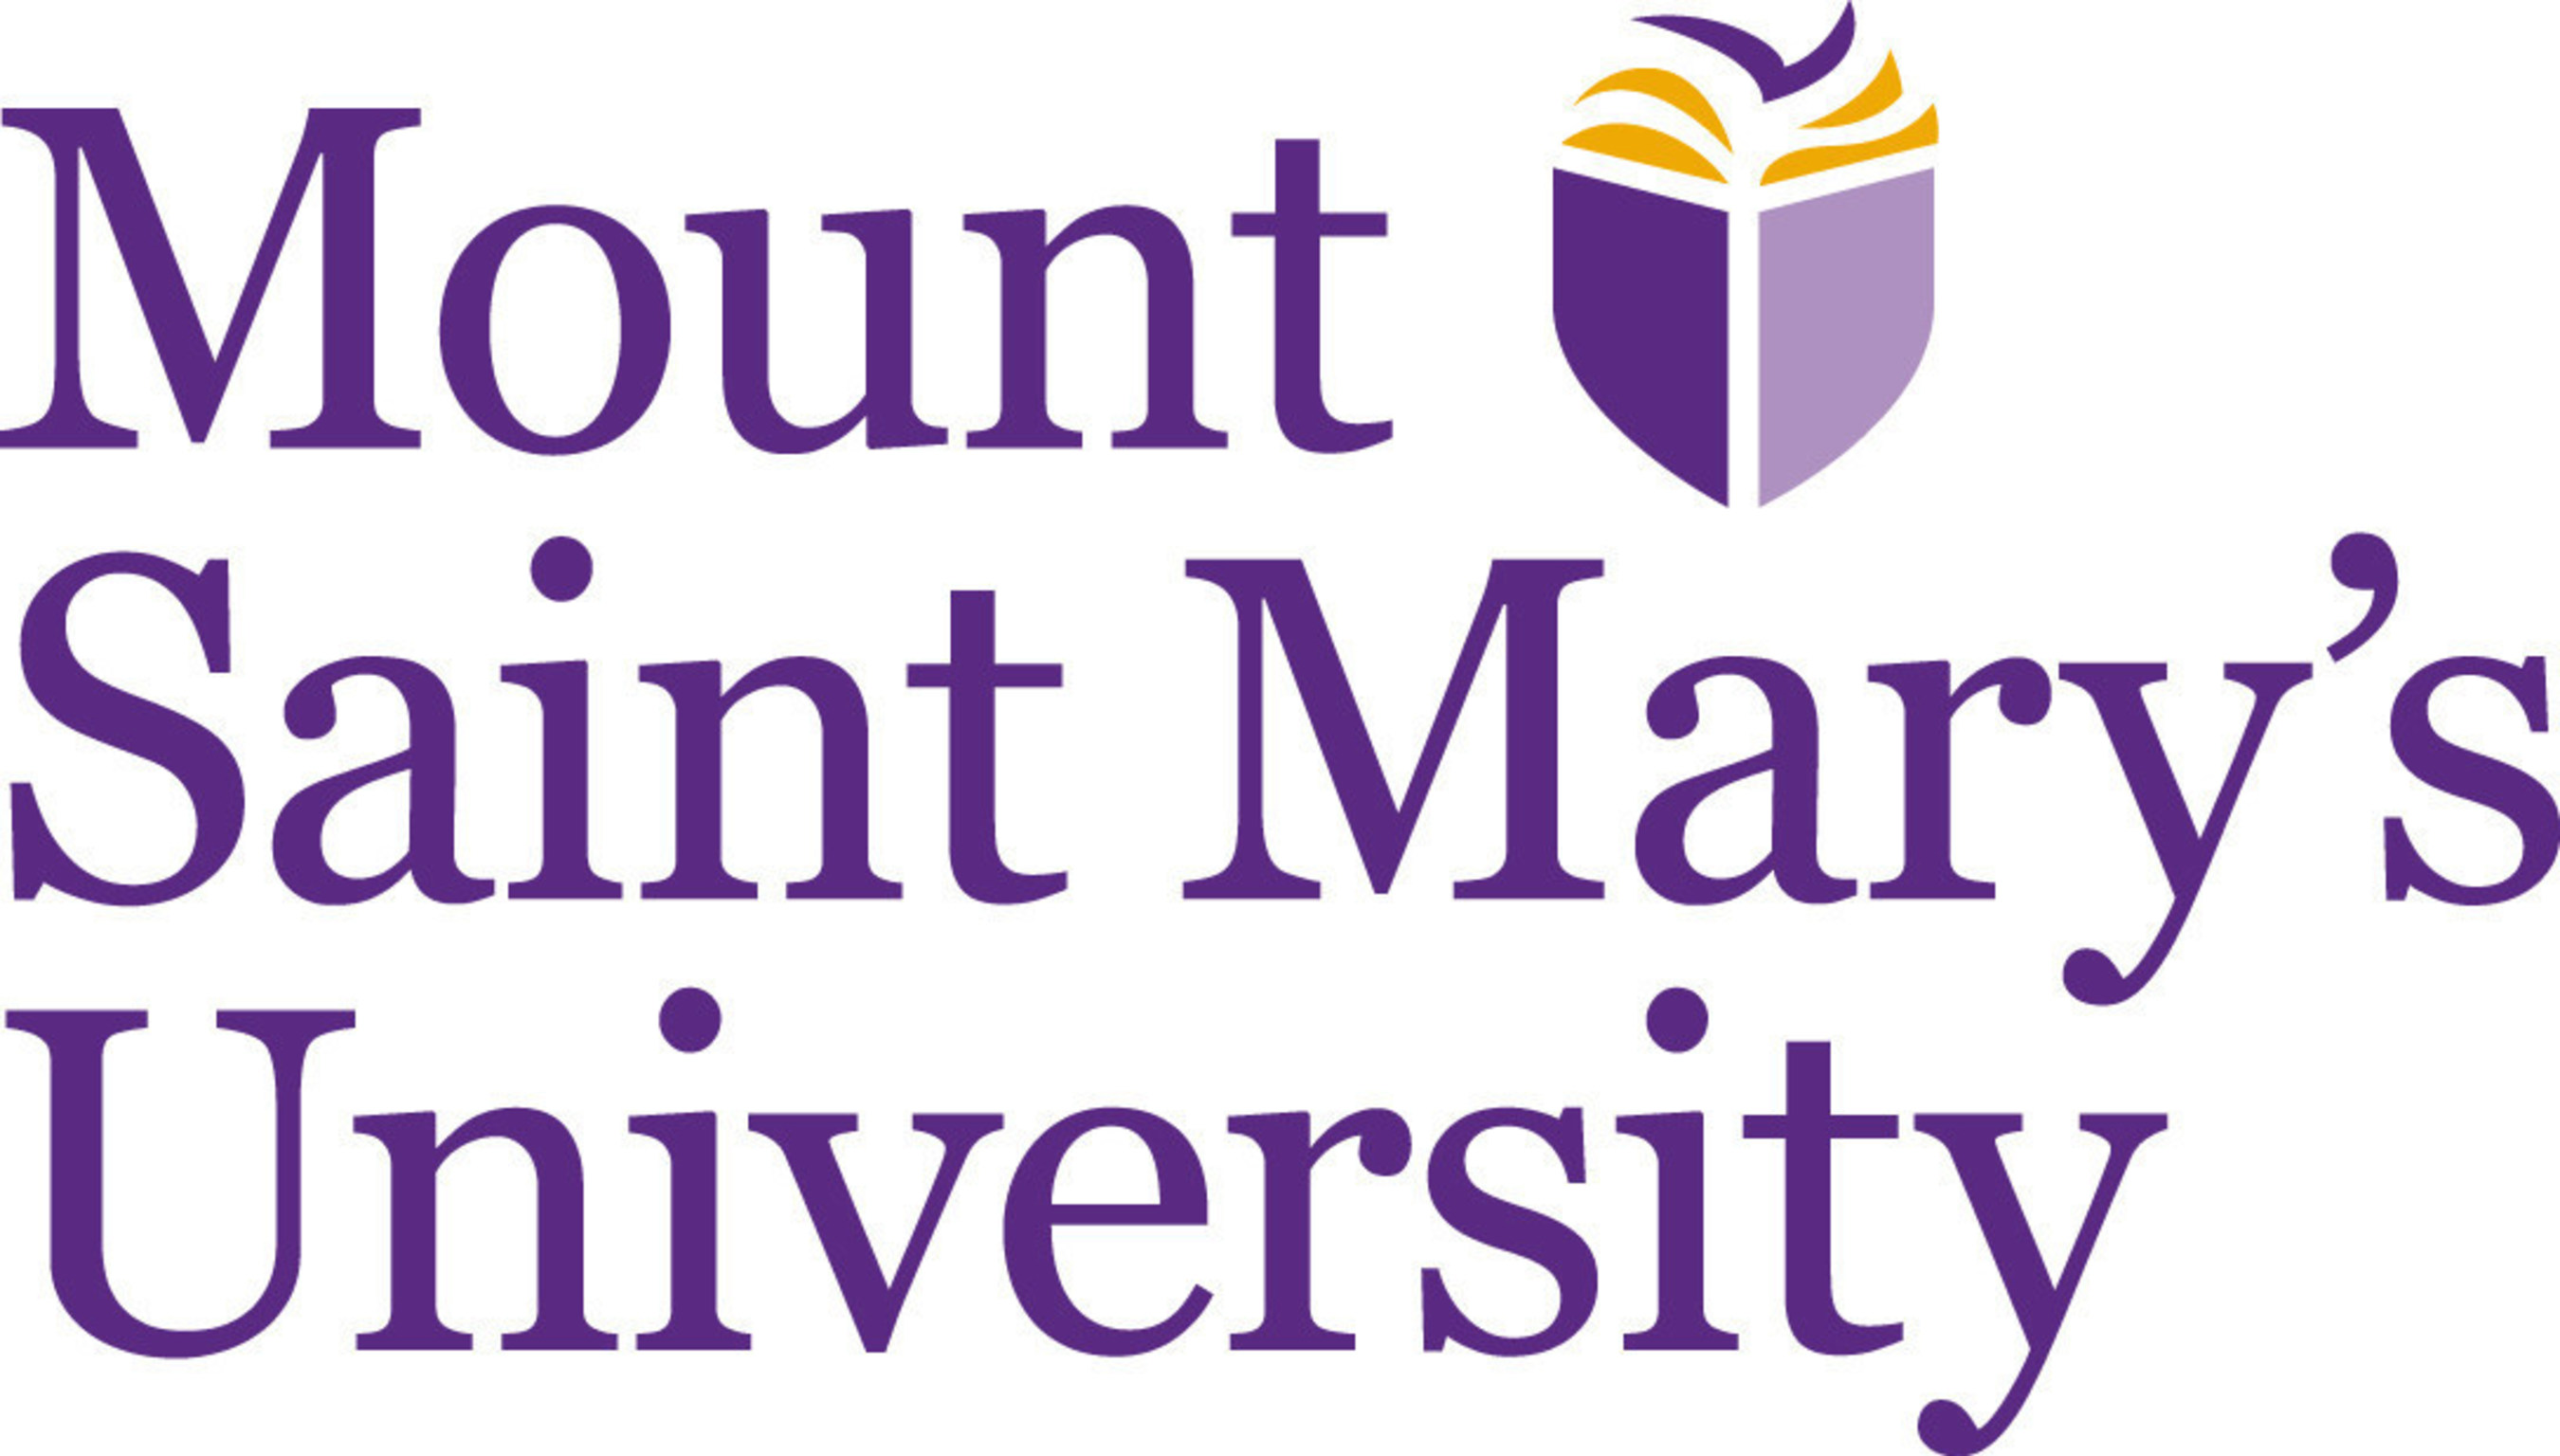 Mount Saint Mary's University in Los Angeles offers a comprehensive liberal arts and sciences curriculum that emphasizes leadership, service and innovation. In addition to more than 30 undergraduate degrees, the University's co-ed Graduate Division also offers 11 degrees, and counting, at the master's and doctoral levels.